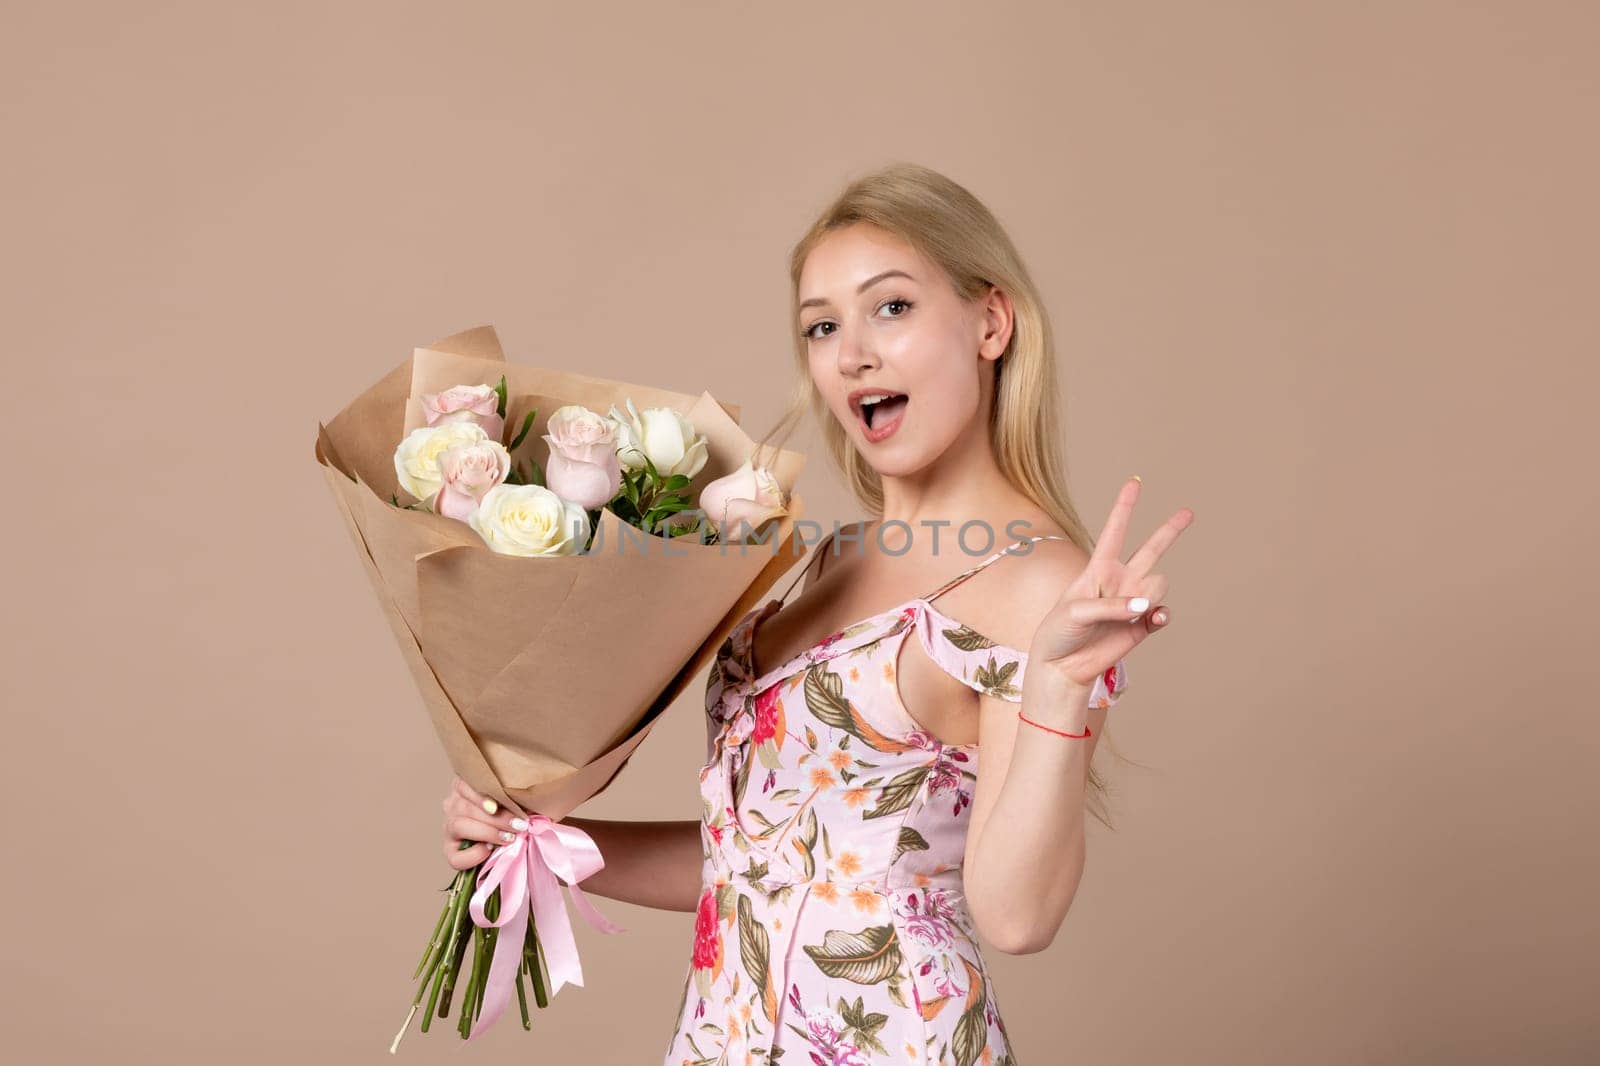 front view young female posing with bouquet of beautiful roses on brown background feminine sensual woman horizontal march gifts marriage equality